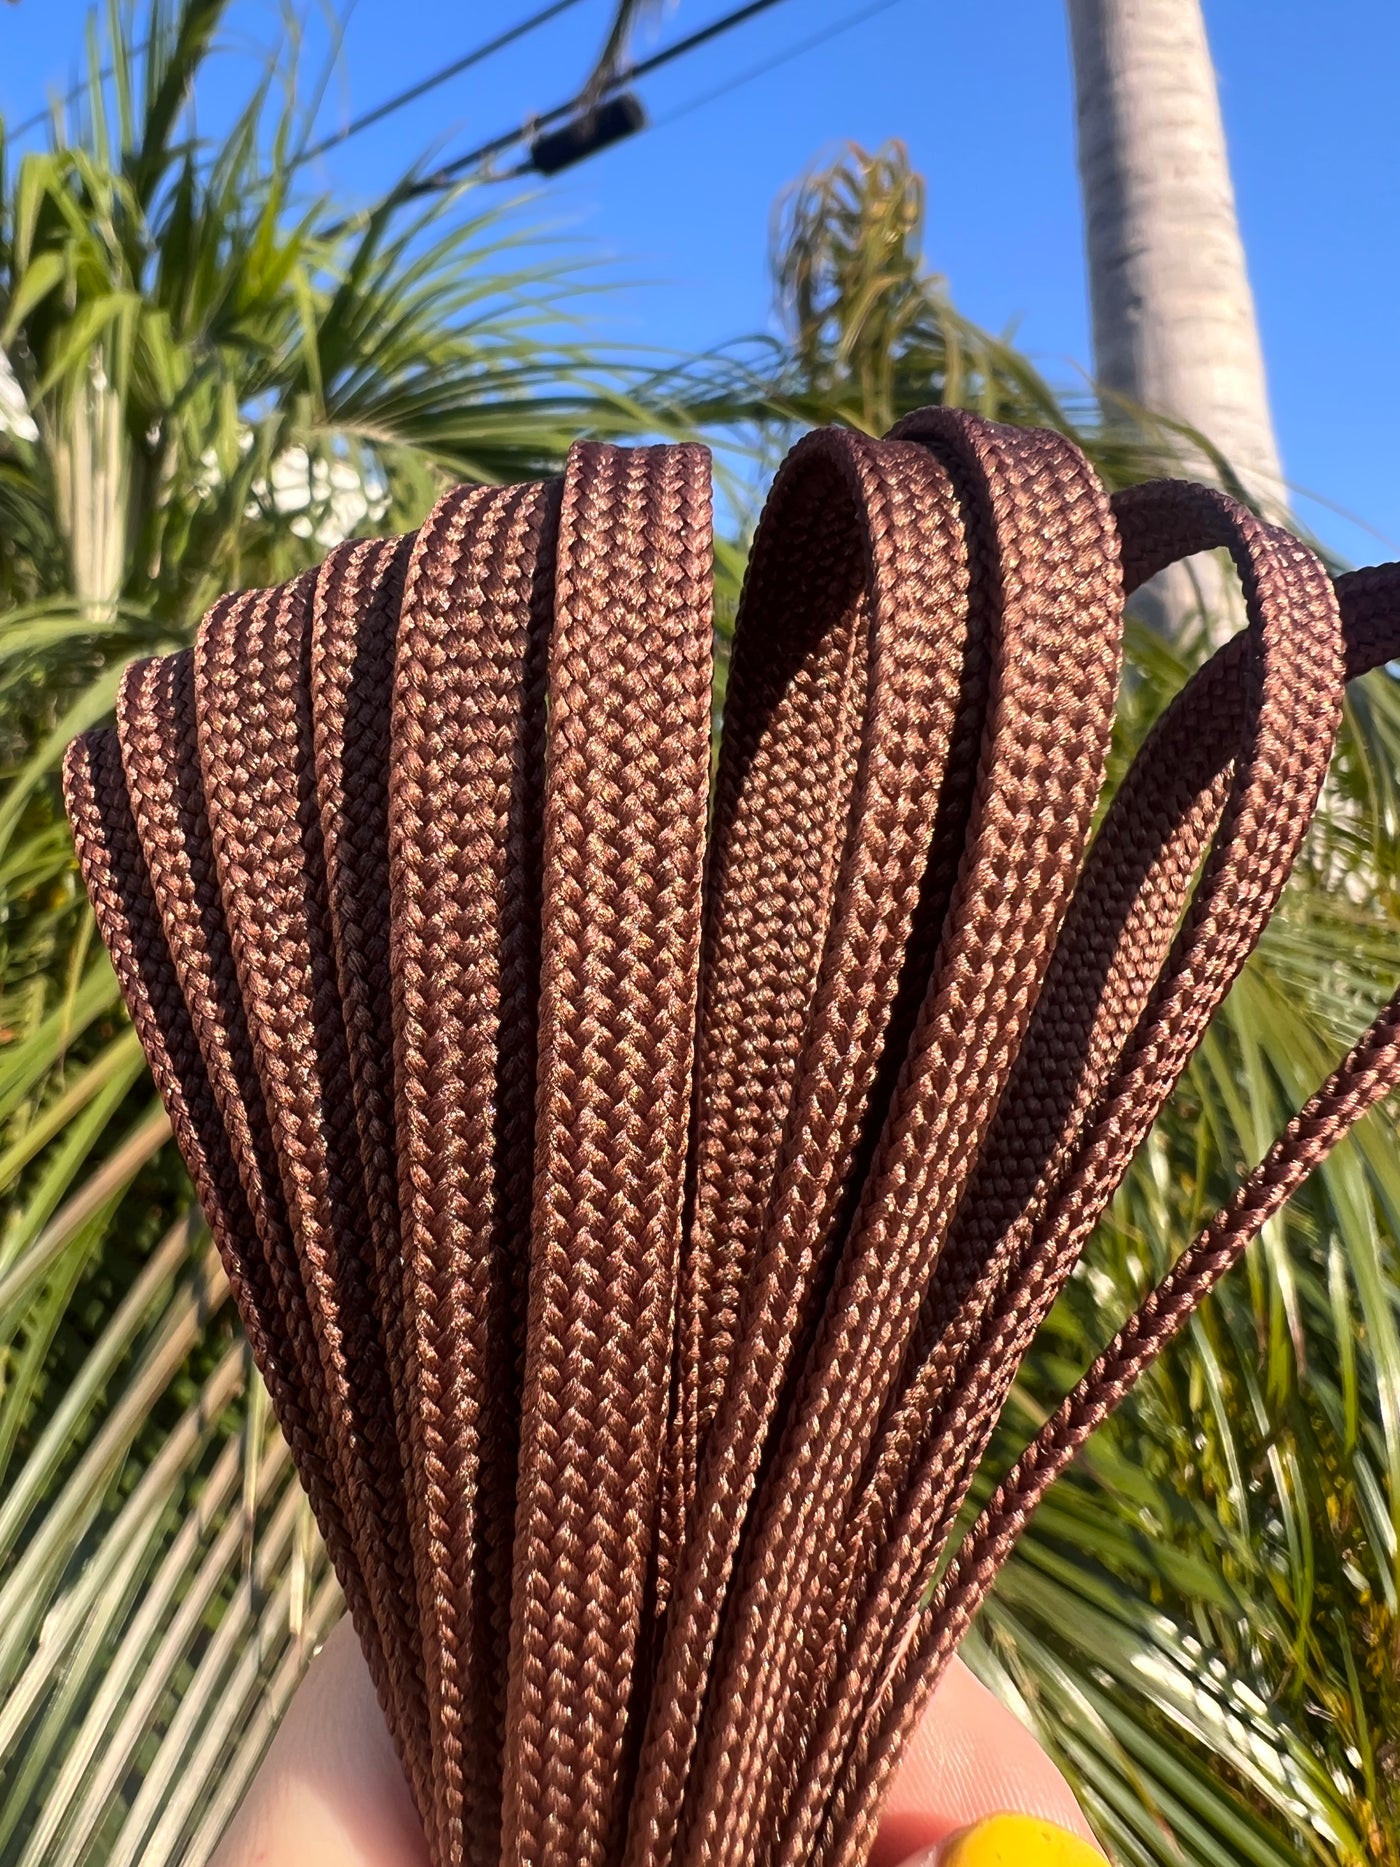 Chocolate Brown 96 inch (244 cm) CORE Shoelace by Derby Laces (NARROW 6MM wide lace)